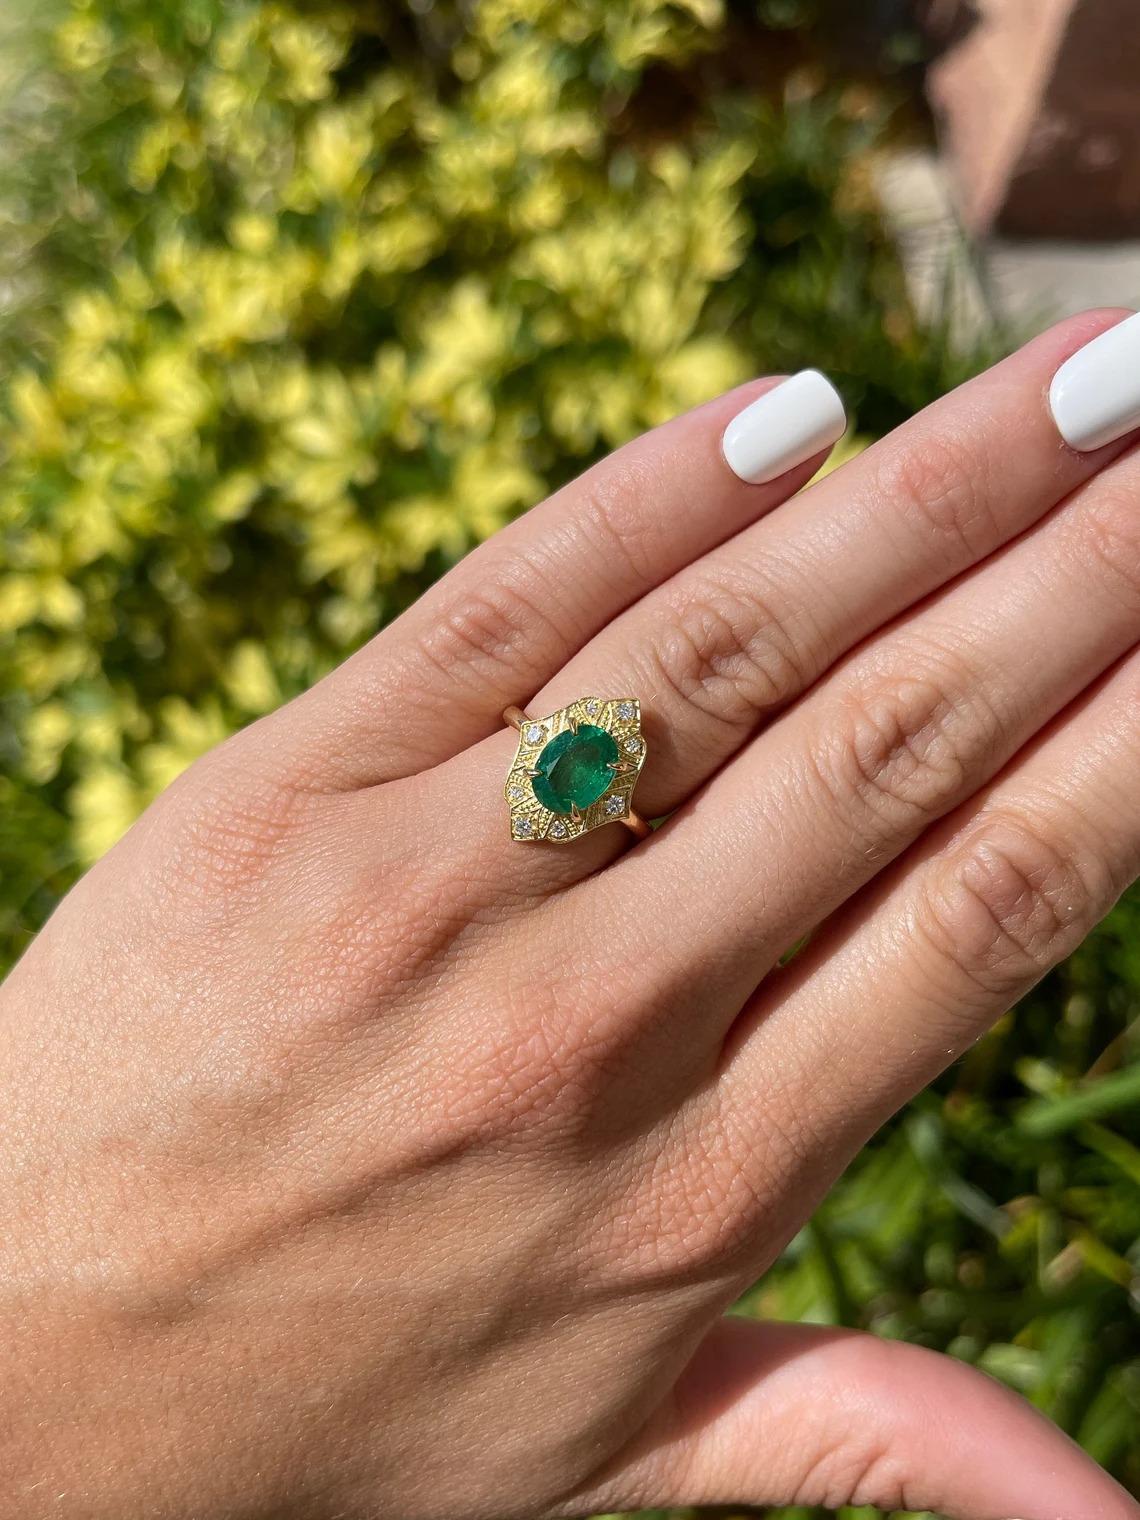 real emerald ring vintage